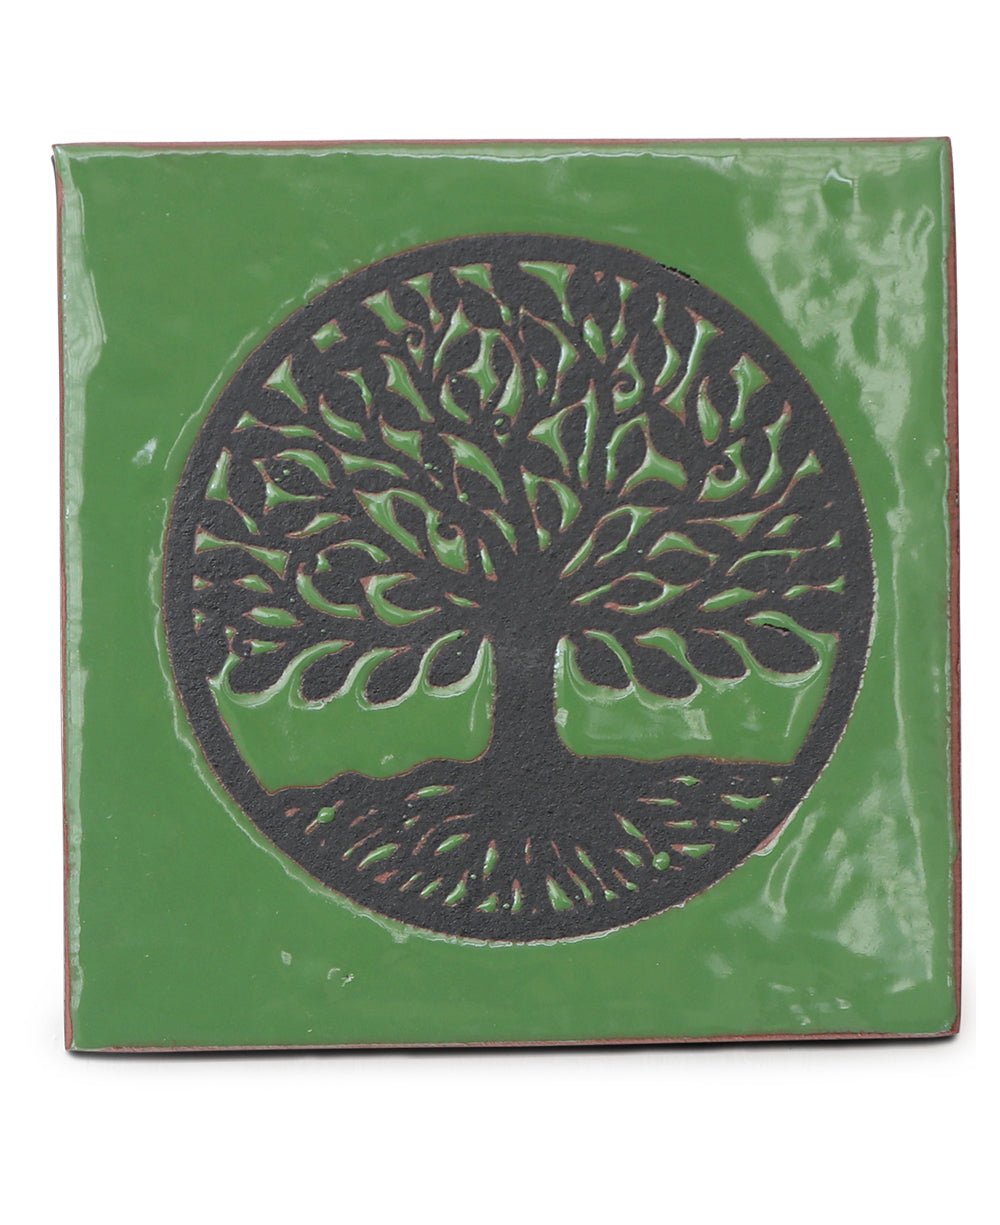 Glazed Ceramic Tile Tree of Life Wall Hanging - Posters, Prints, & Visual Artwork